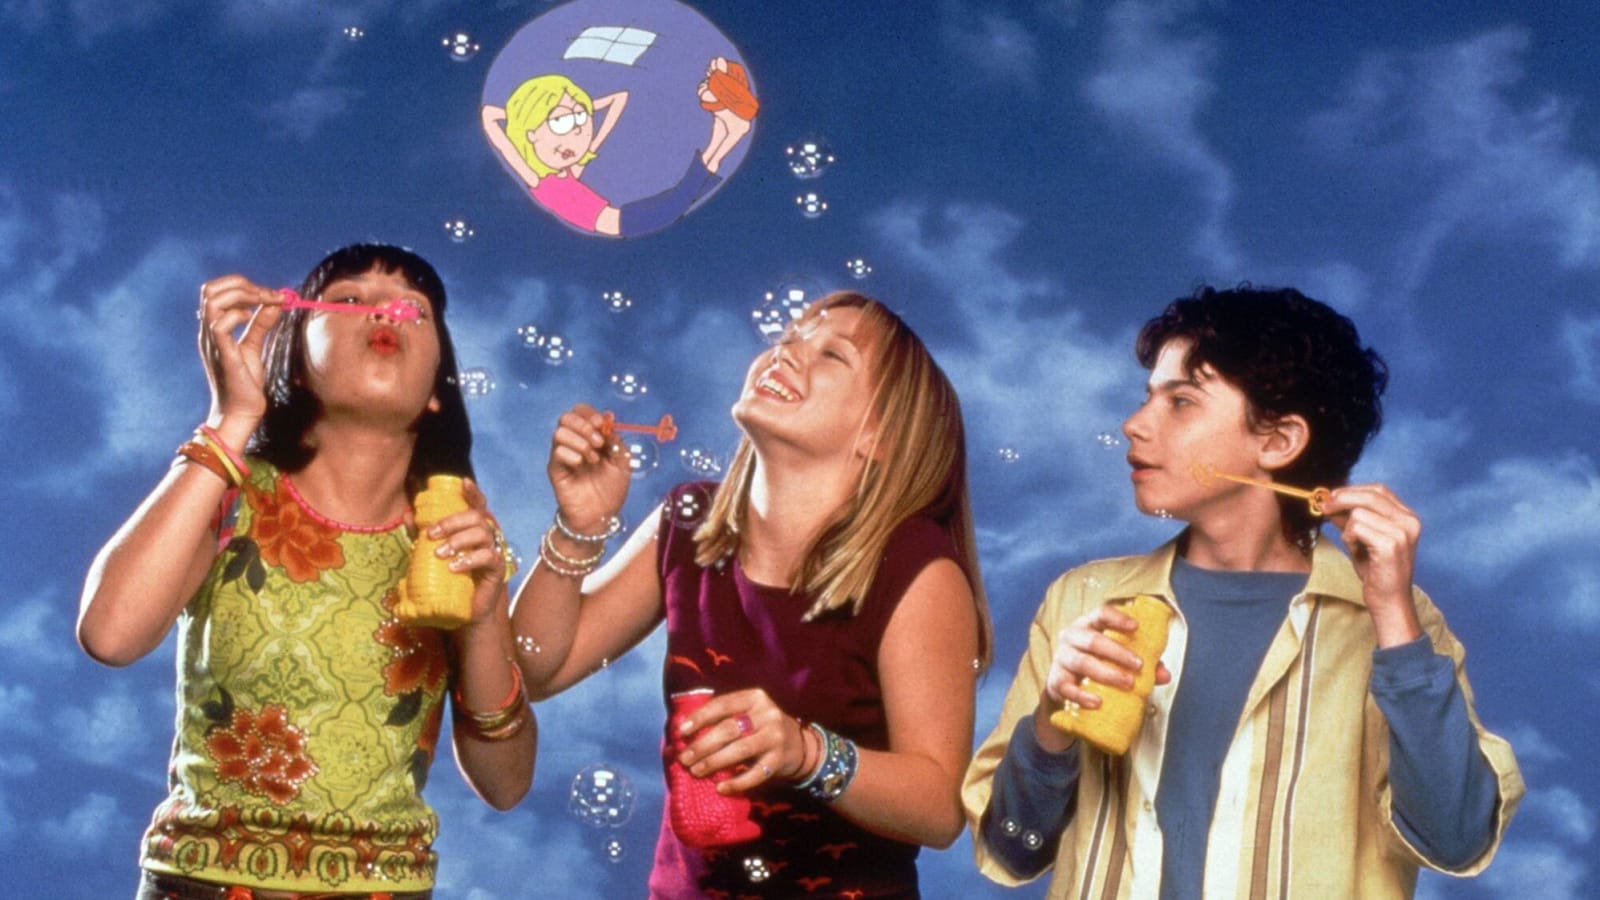 21 children’s shows that proved there’s good in the world